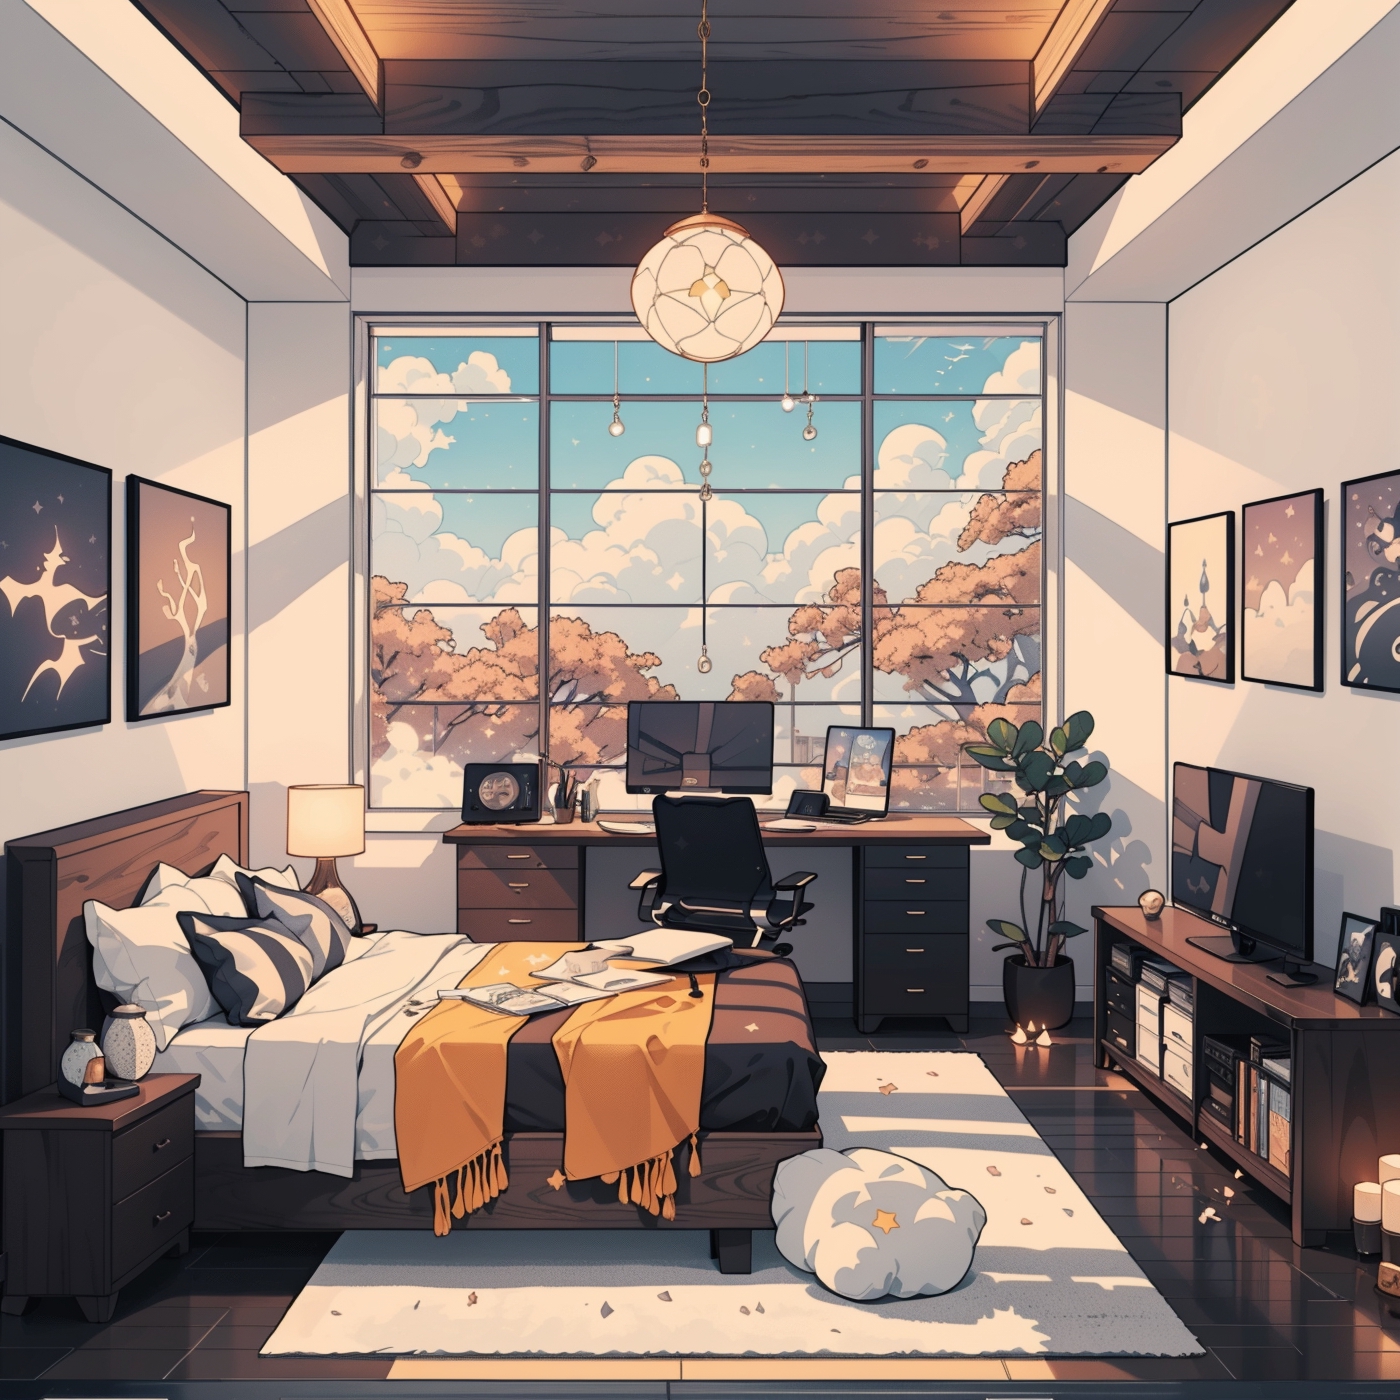 8 Background Anime - Bedroom ( phòng ngủ ) ideas | episode interactive  backgrounds, episode backgrounds, anime places